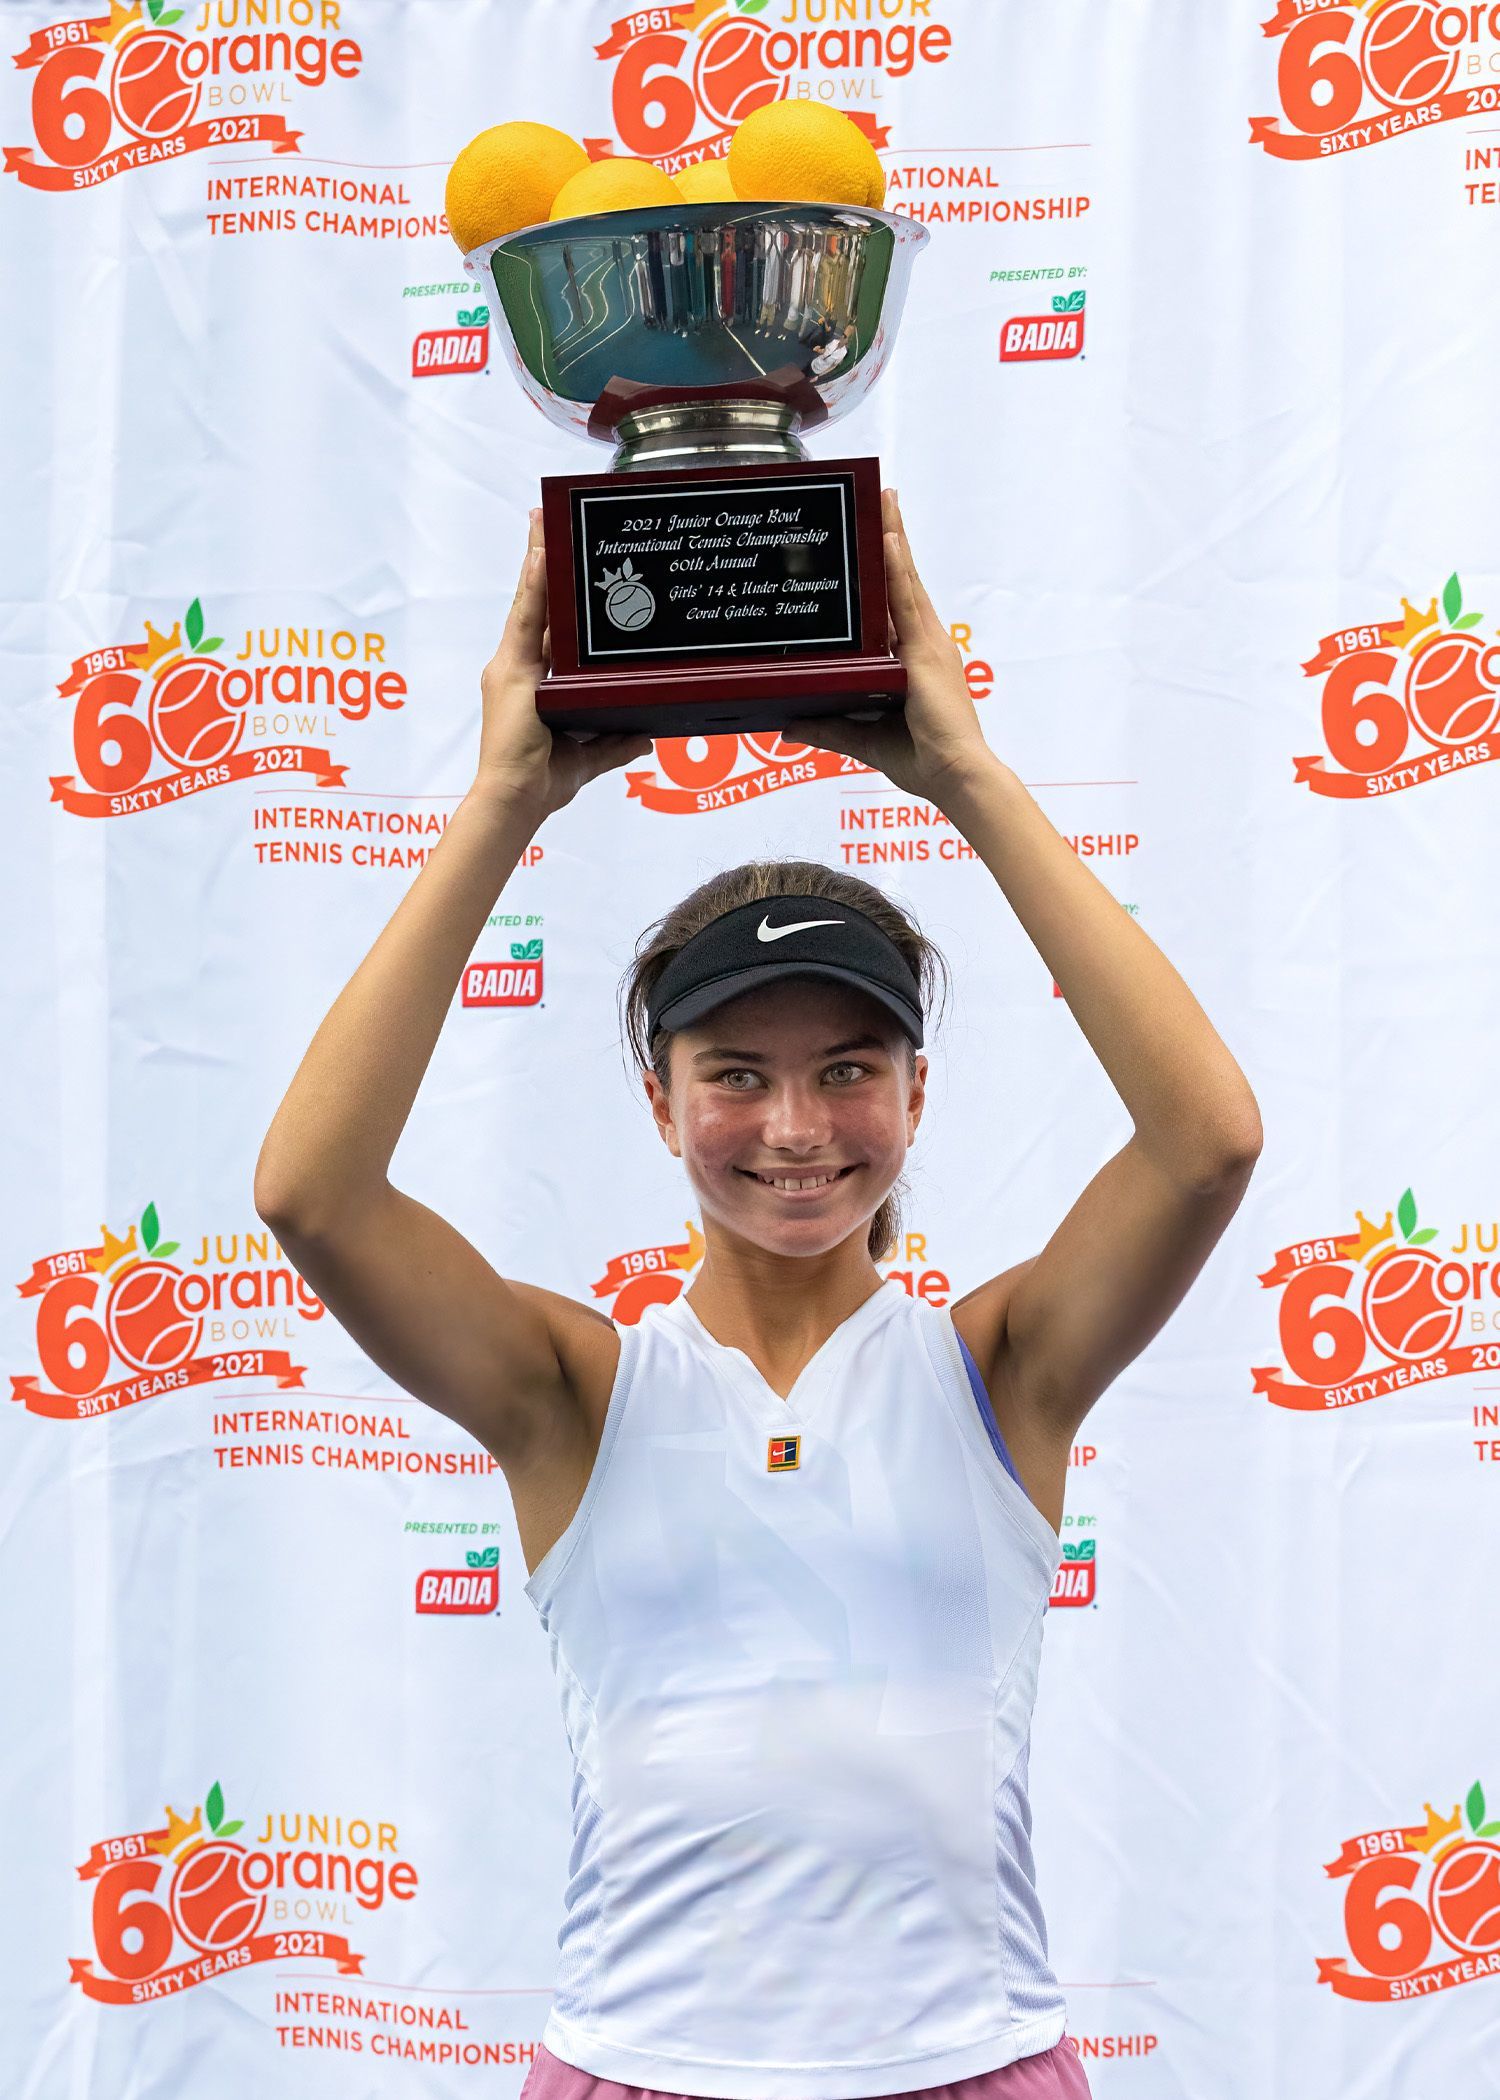 Top-seeded Iva Jovic of Torrance, California wins over fourth-seeded Shannon Lam of East Brunswick, N.J. in the Girls' 14s.